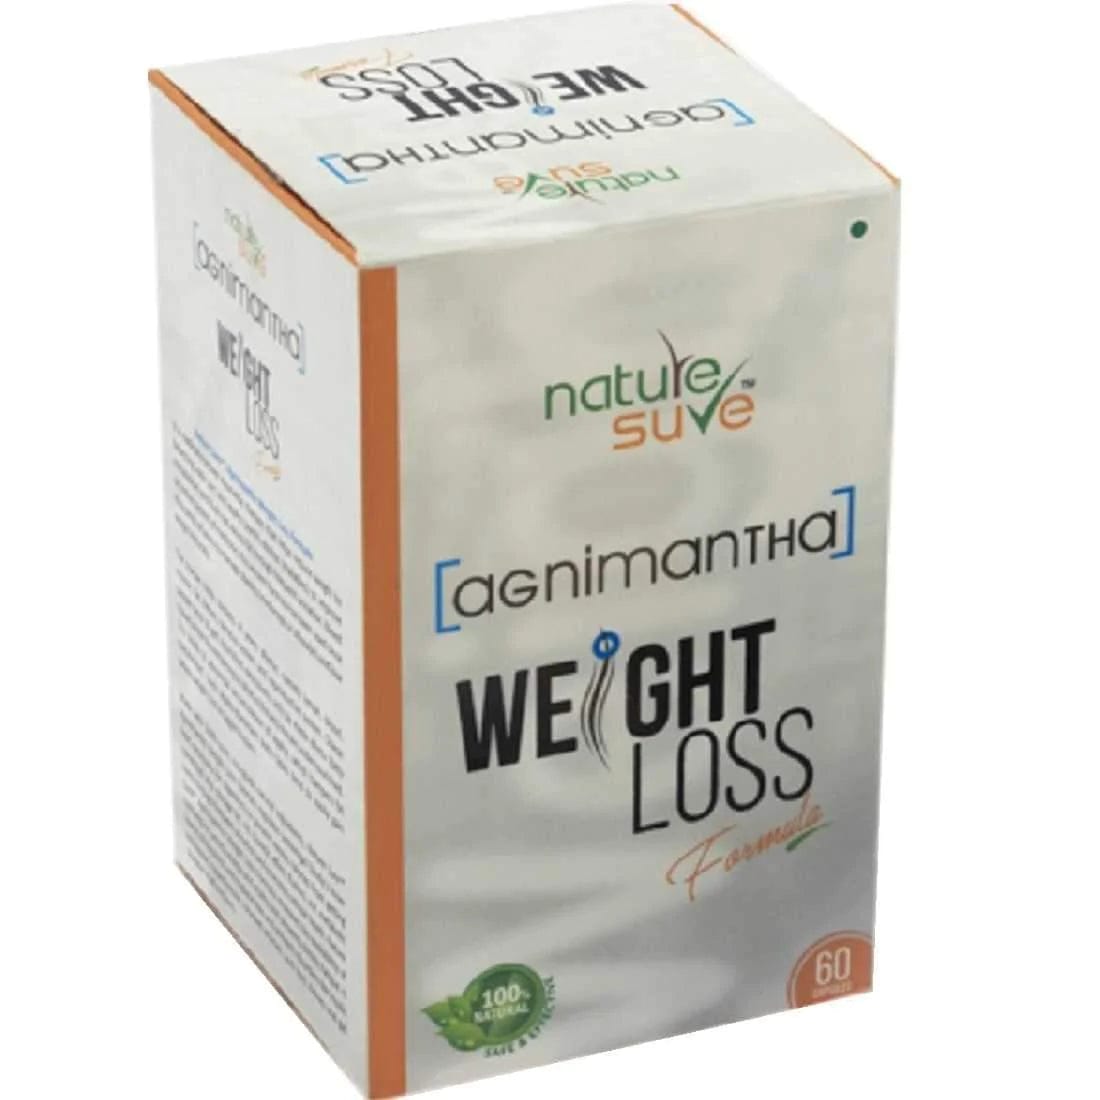 Nature Sure Nature Sure Agnimantha Weight Loss Formula For Men and Women - 60 Capsules